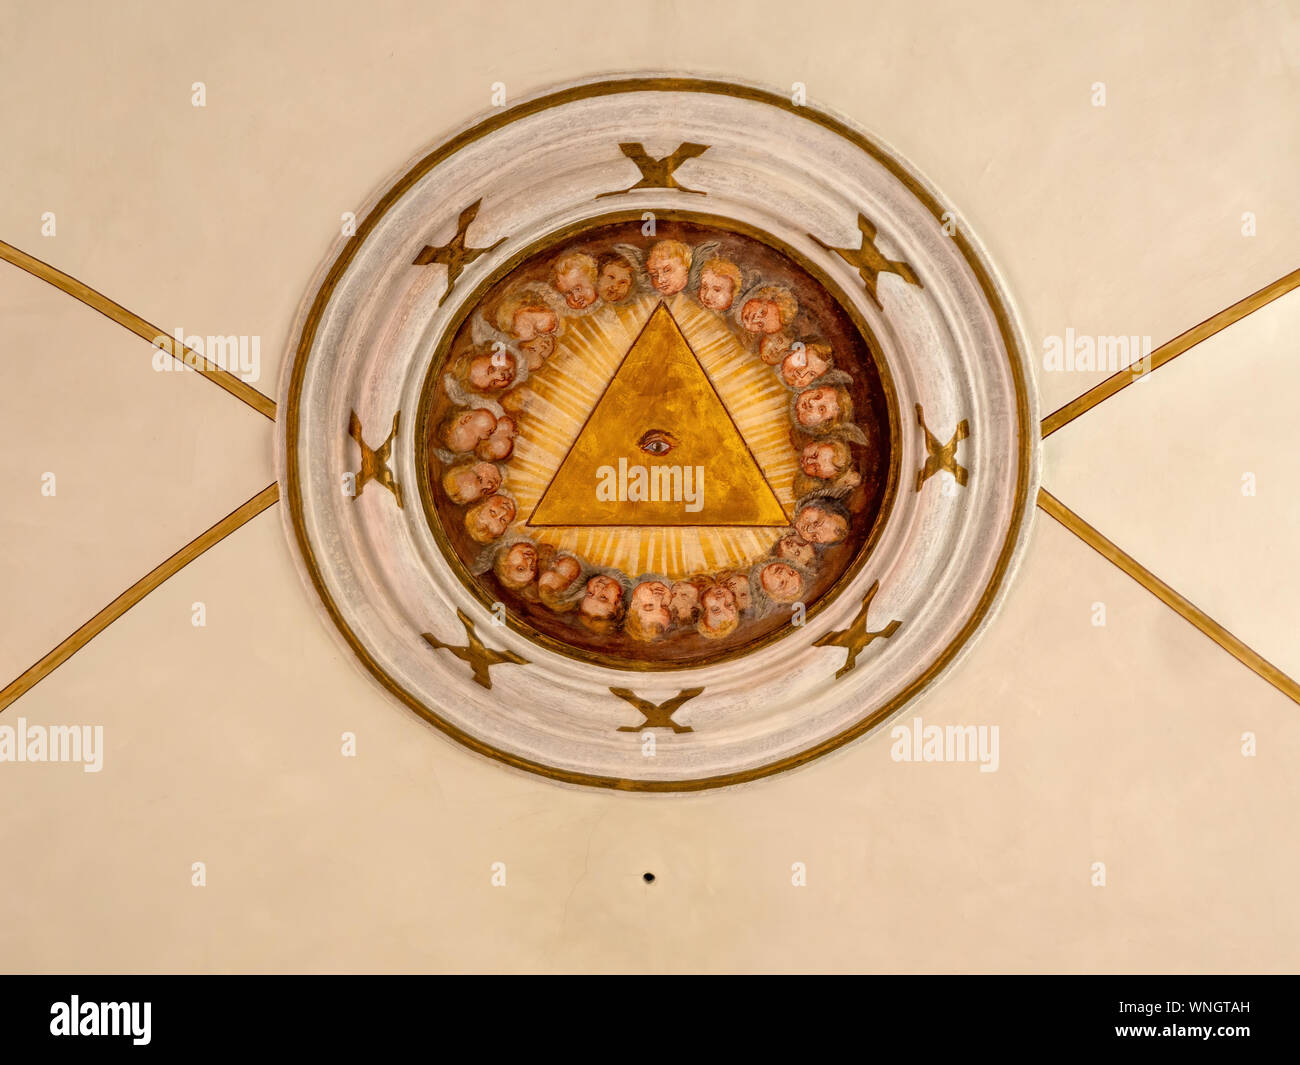 BRIXEN - BRESSANONE, ITALY - AUGUST 31, 2019: The all-seeing eye in the interior ceiling of the Church of the Guardian Angel. Stock Photo